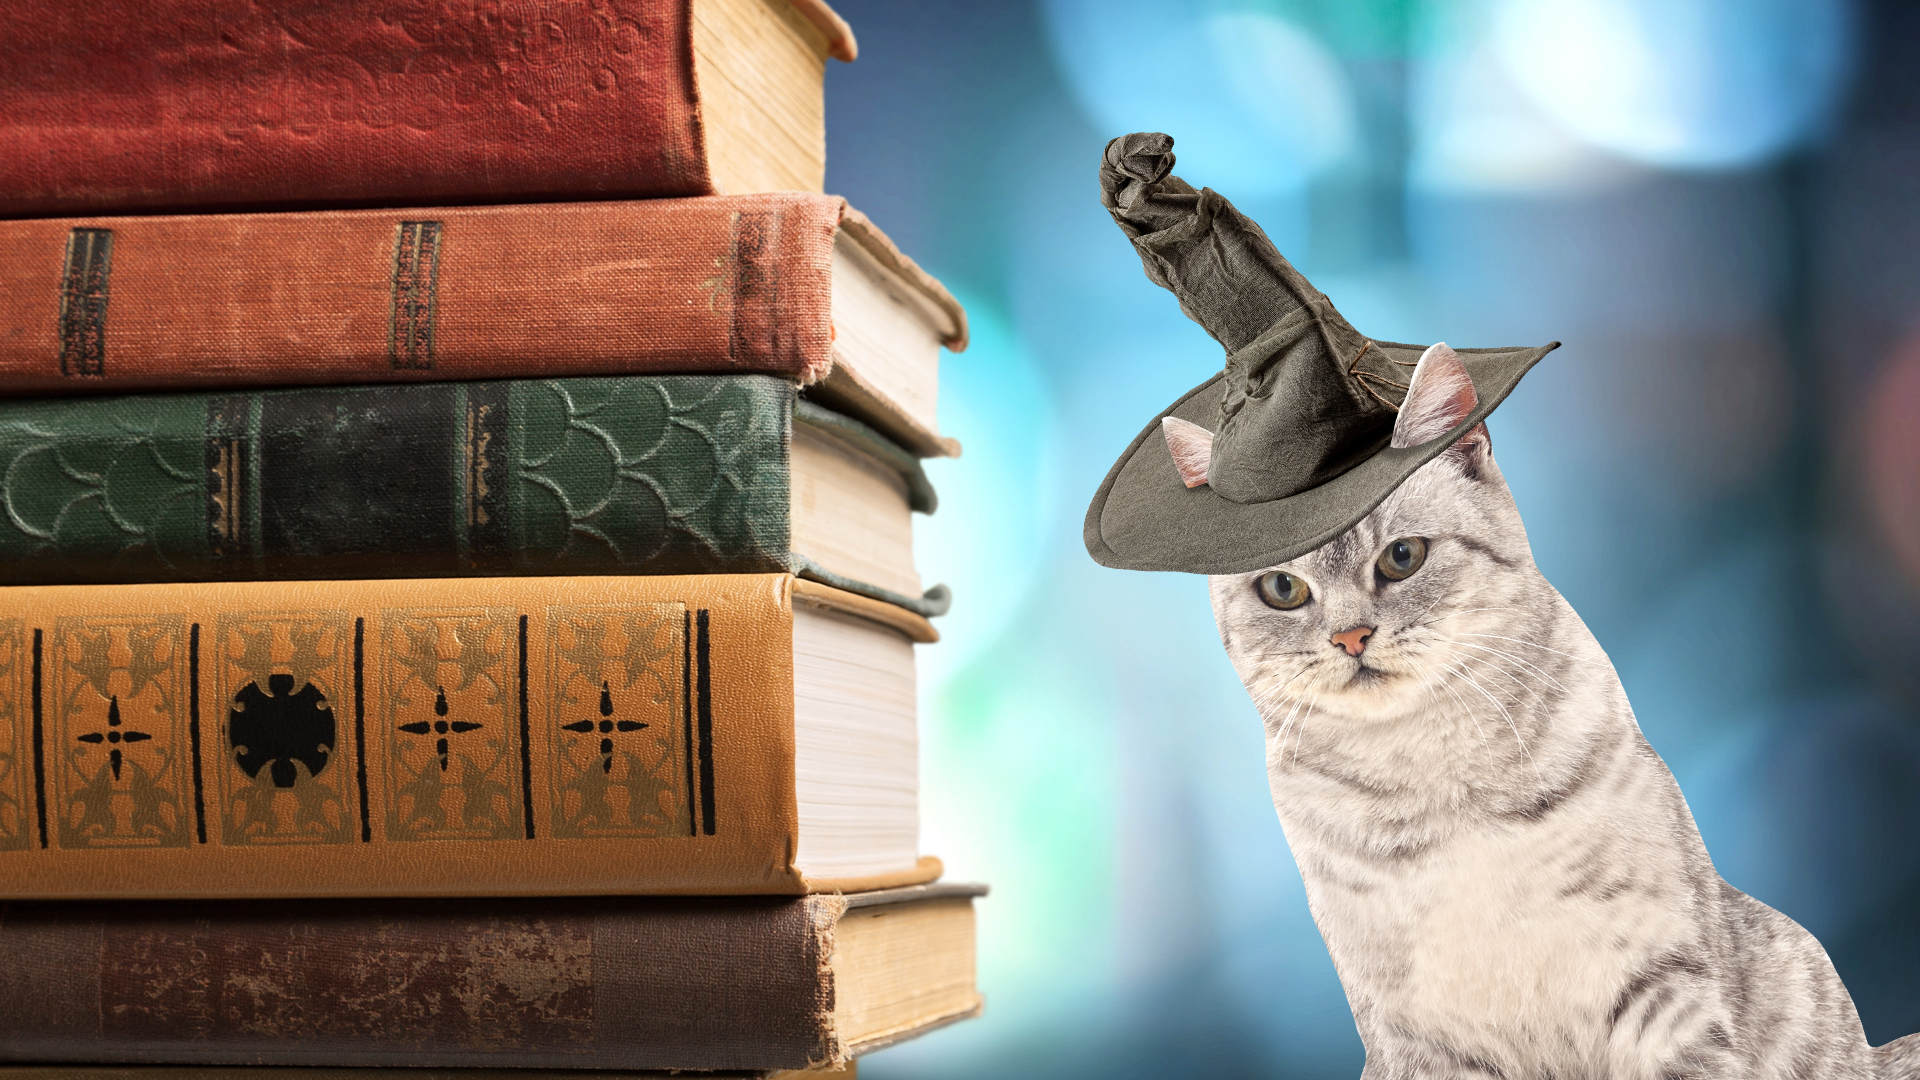 McGonagall cat and a pile of books